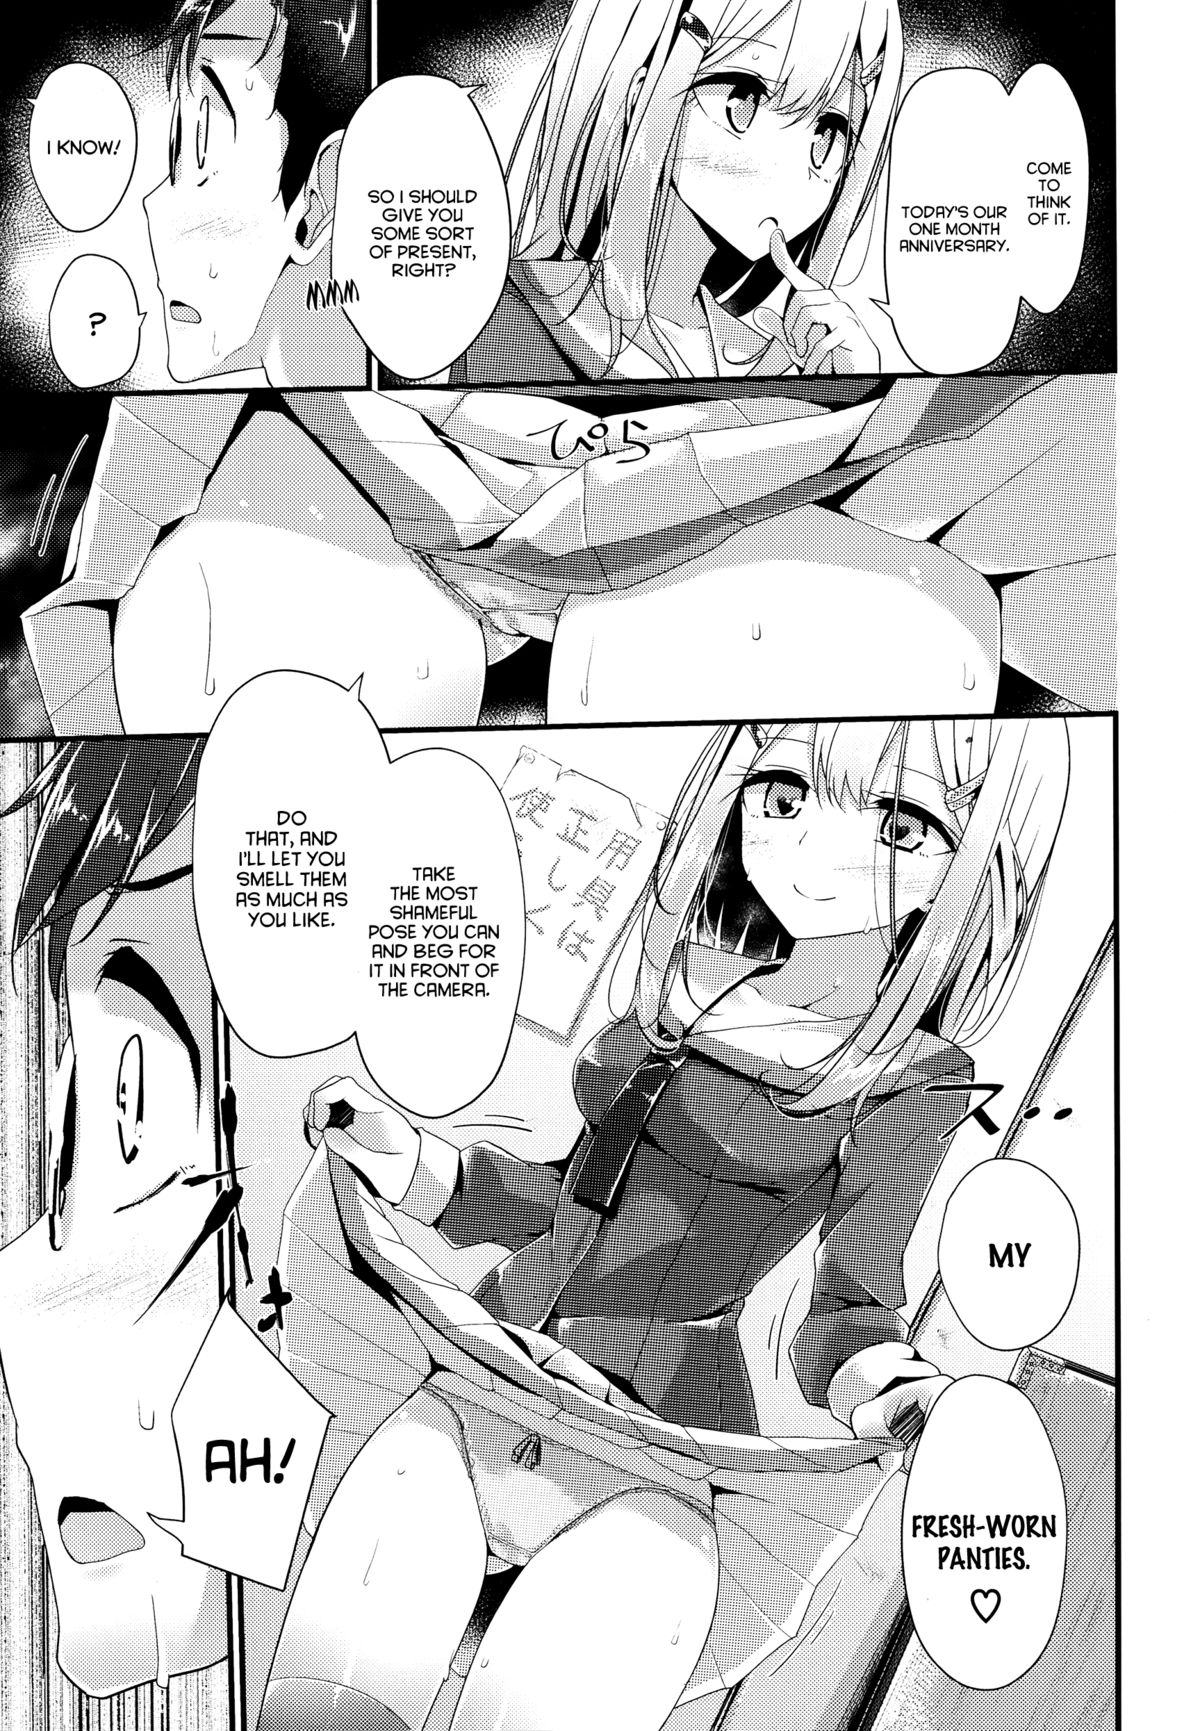 [Oouso] Olfactophilia (Girls forM Vol. 06) [English] =LWB= page 17 full